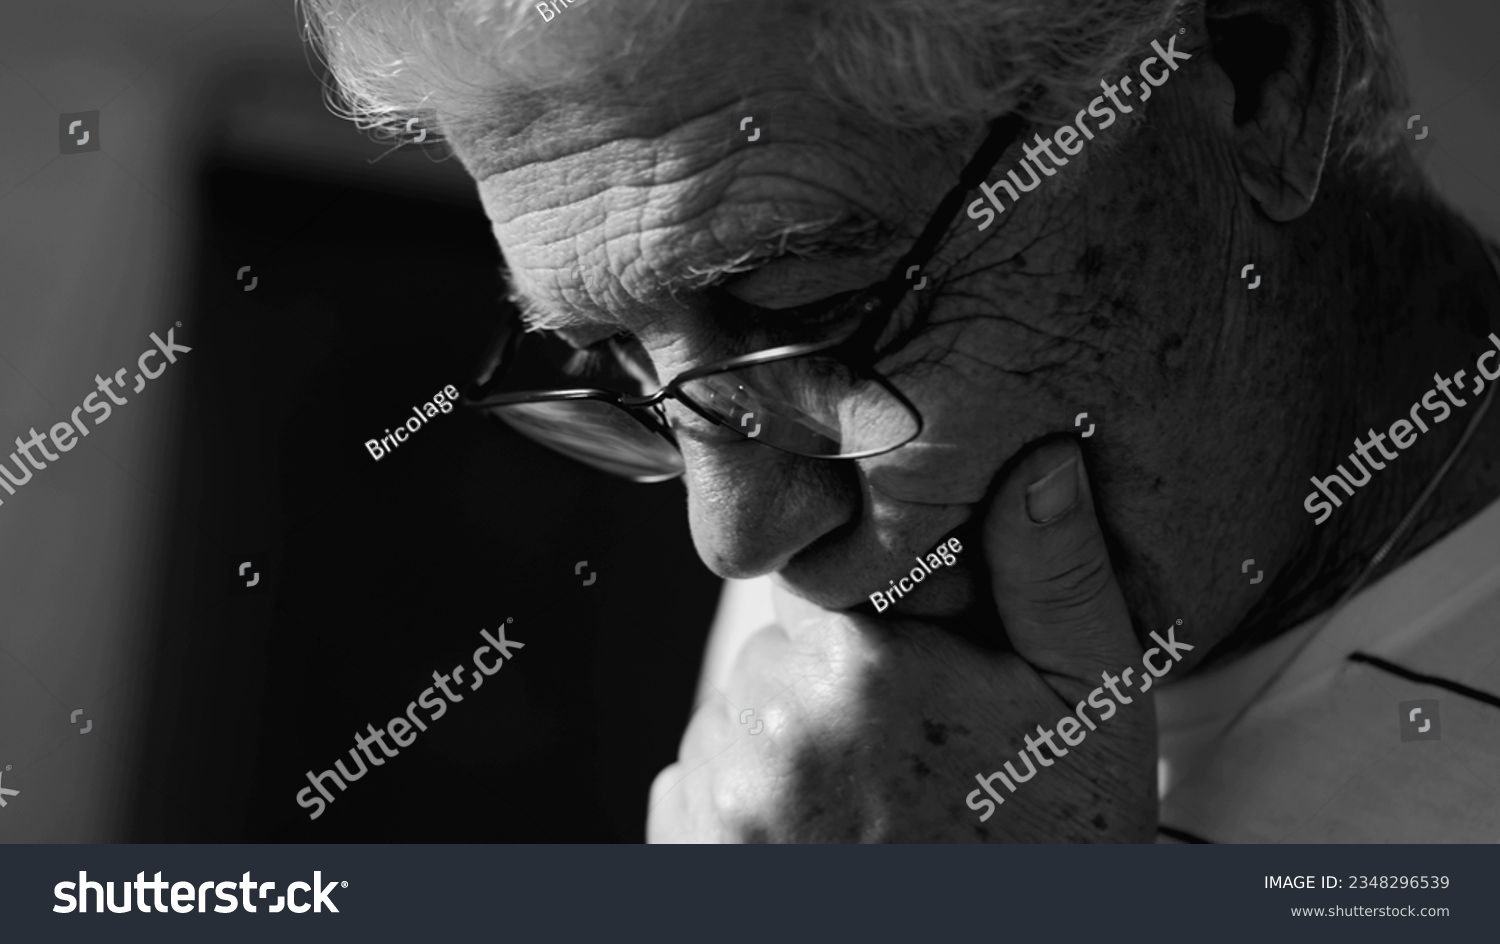 Senior man considering options in monochrome black and white. Dramatic elderly person ponders problems with hand in chin #2348296539